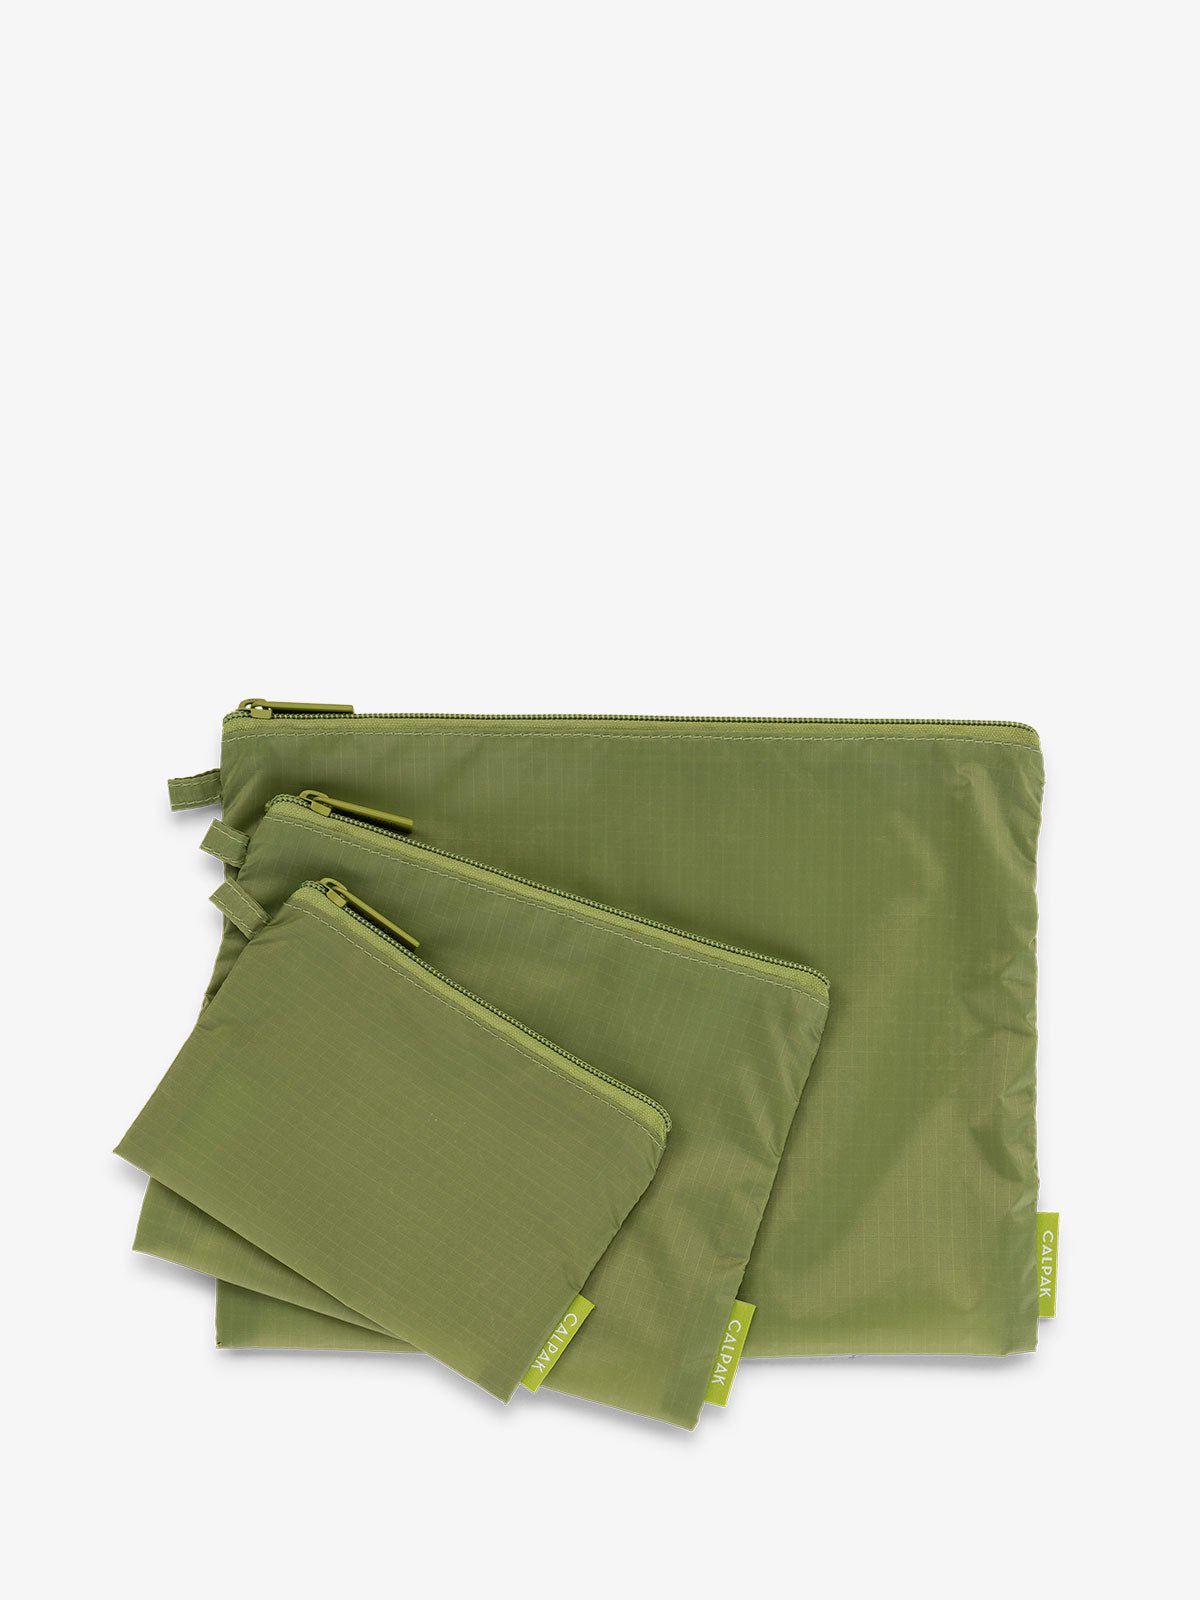 CALPAK Compakt zippered pouches in palm